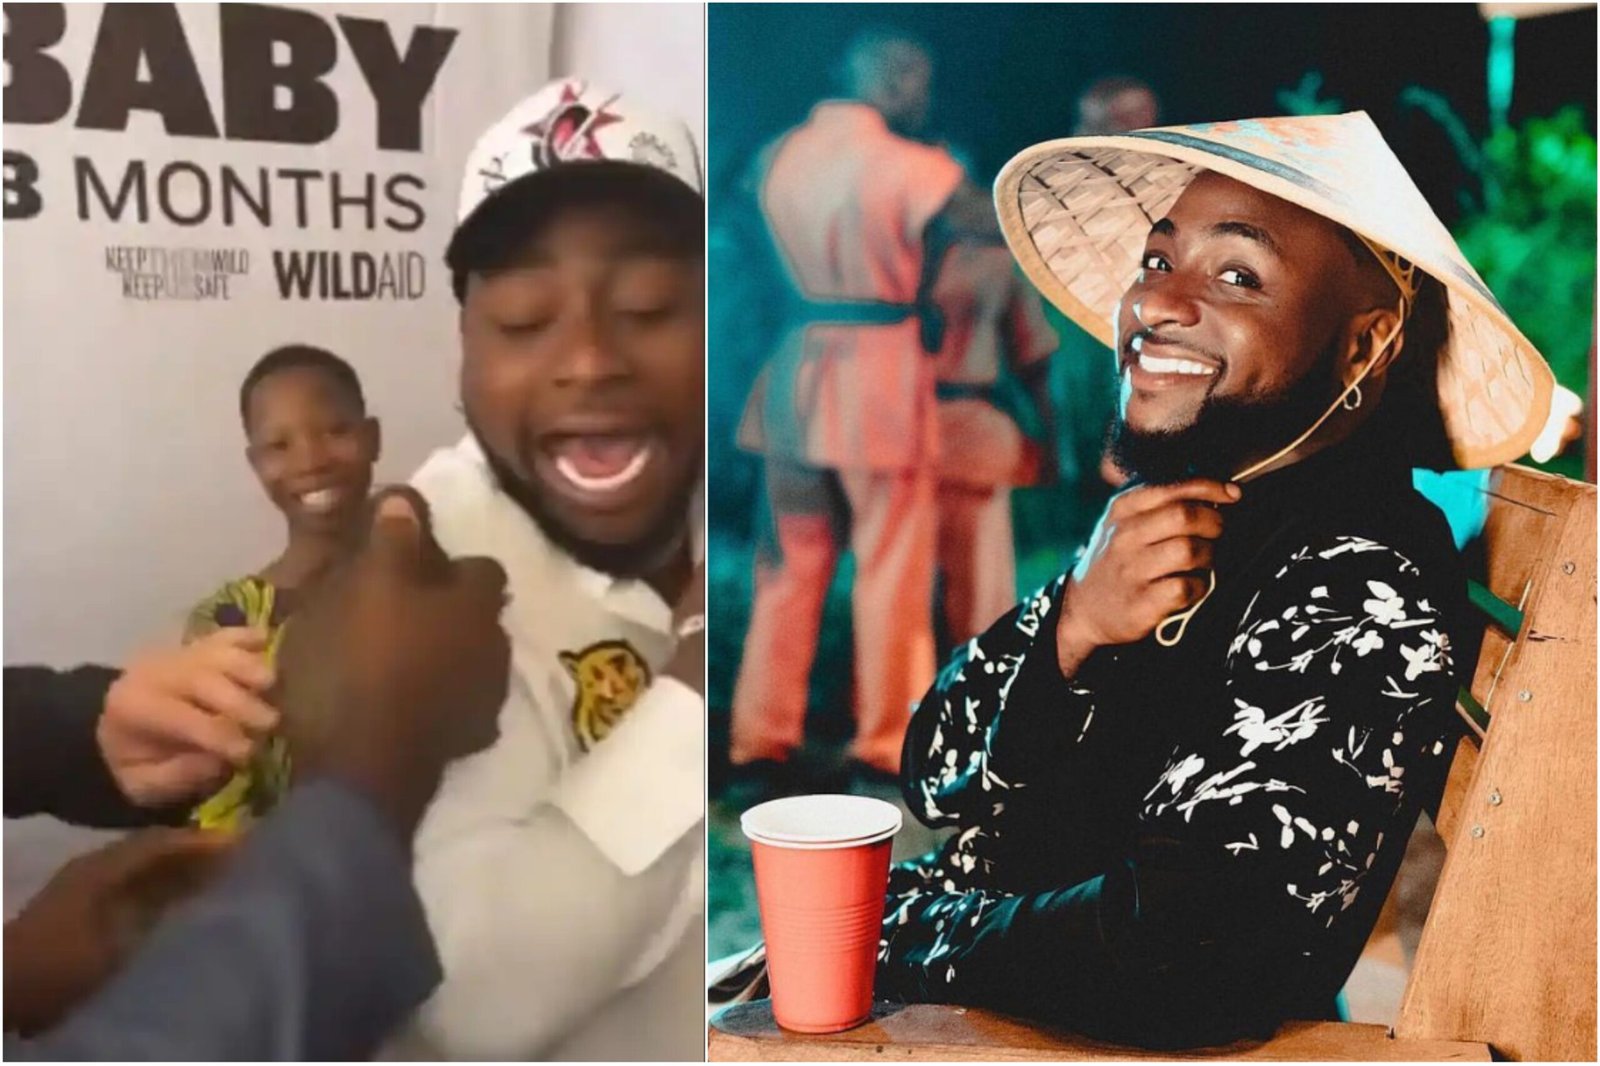 Funny moment Davido gets scared, screams for help during campaign against animal extinction (video)